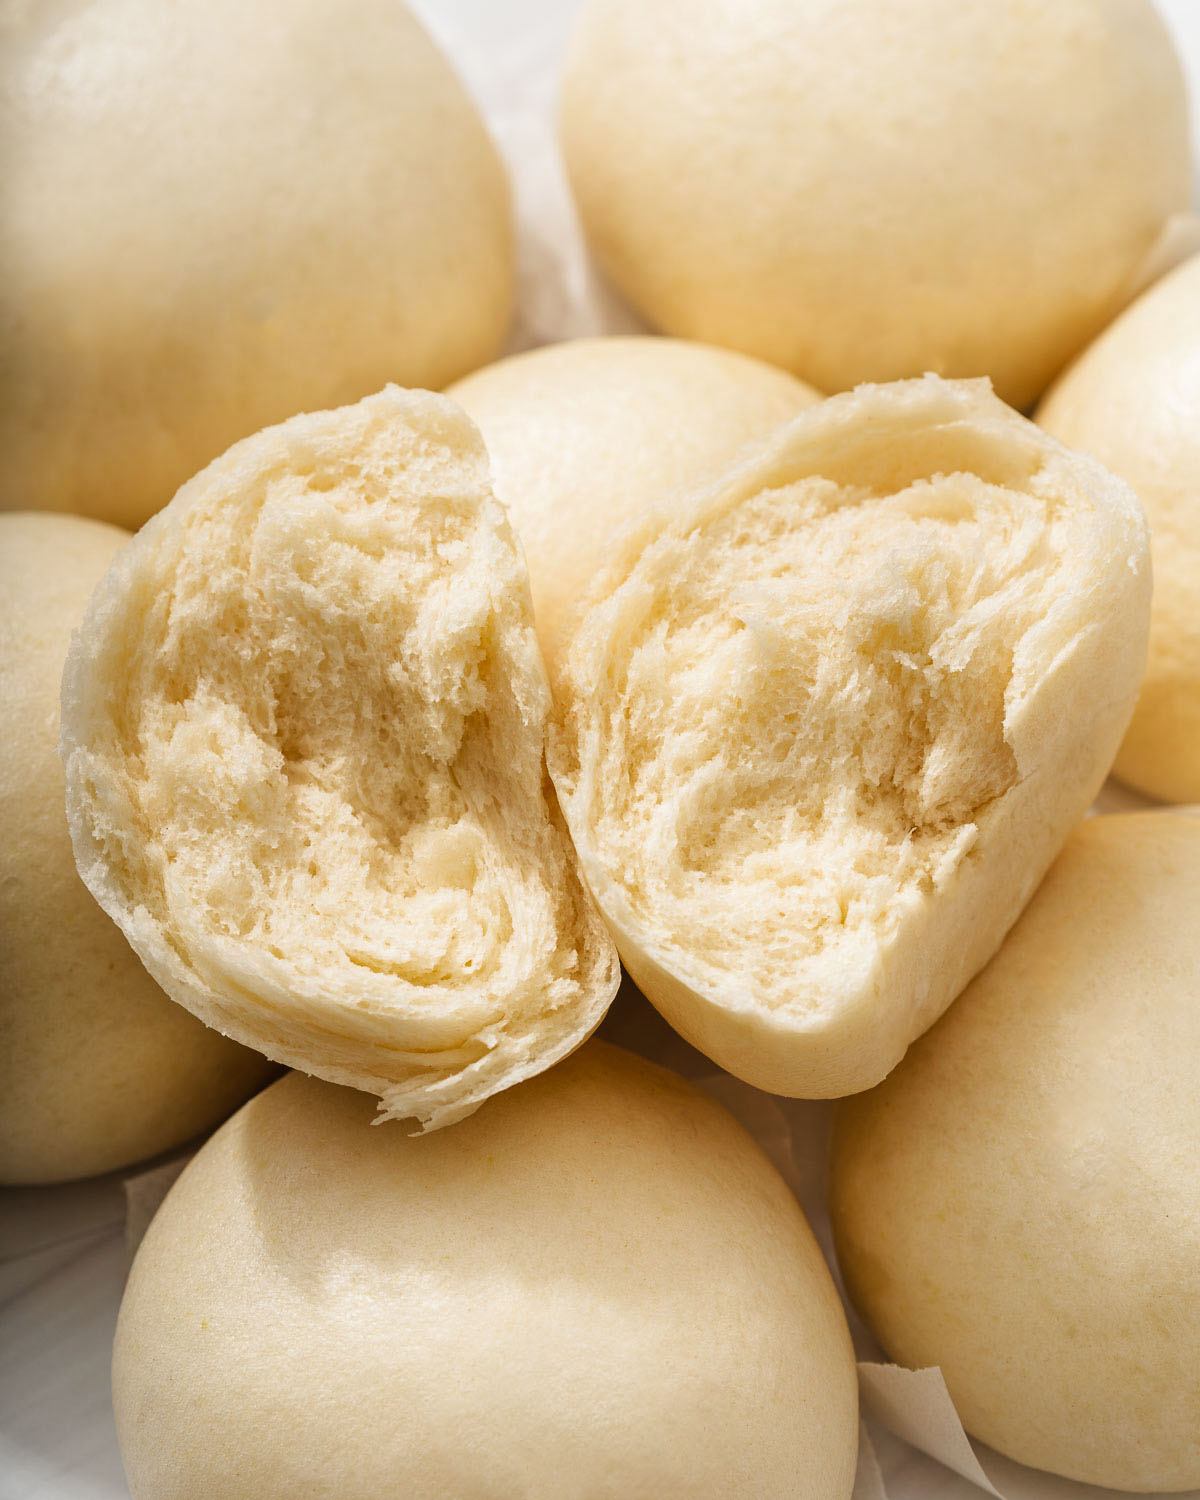 A torn open mantou Chinese steamed bun resting on top of other buns.